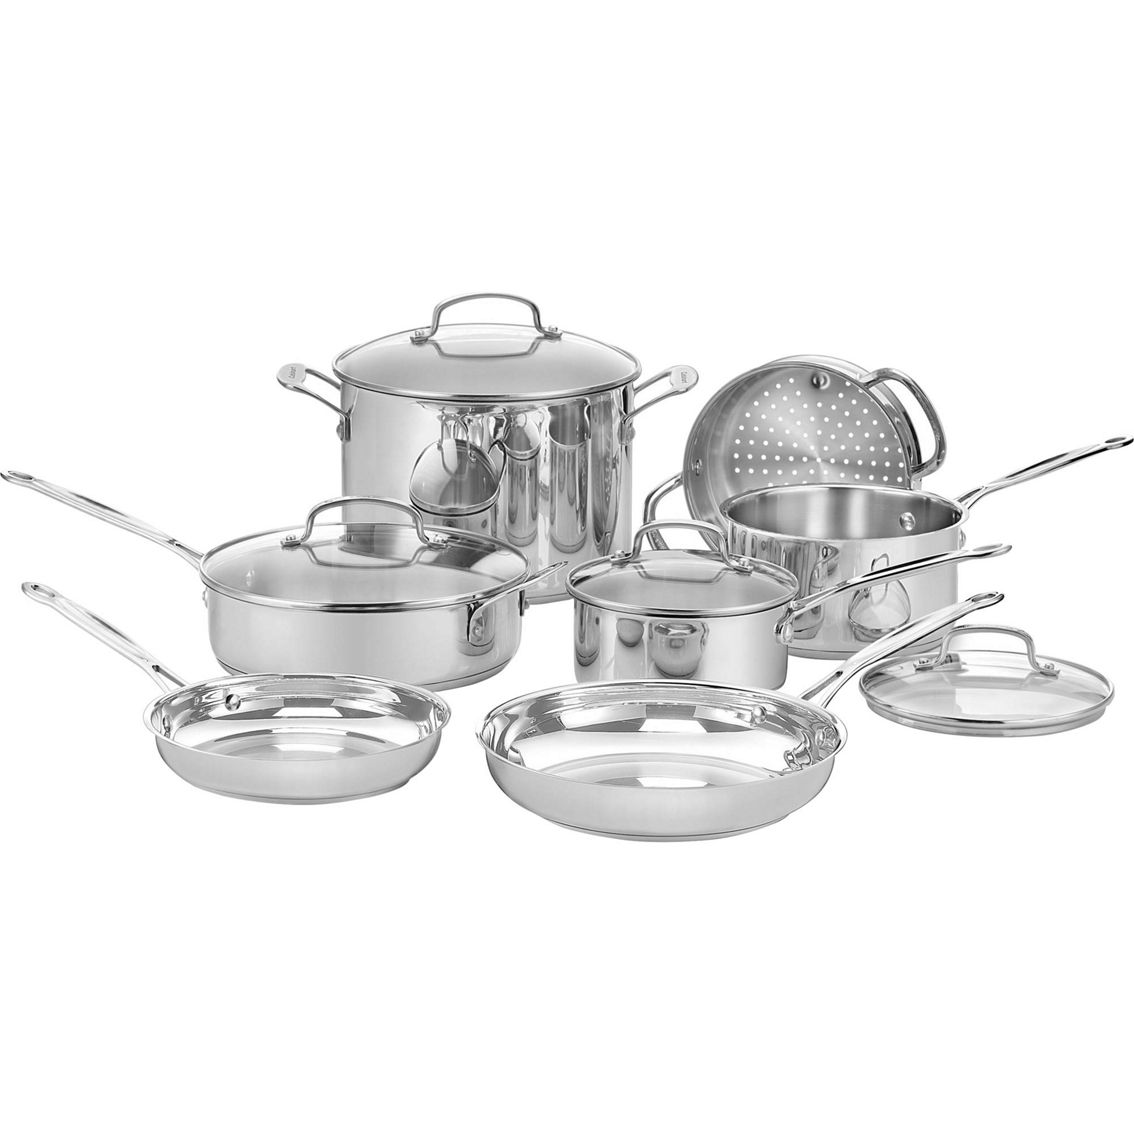 Cuisinart Chef's Classic Stainless Steel 11 Pc. Cookware Set Cuisinart Chef's Classic 11 Pc Stainless Steel Cookware Set